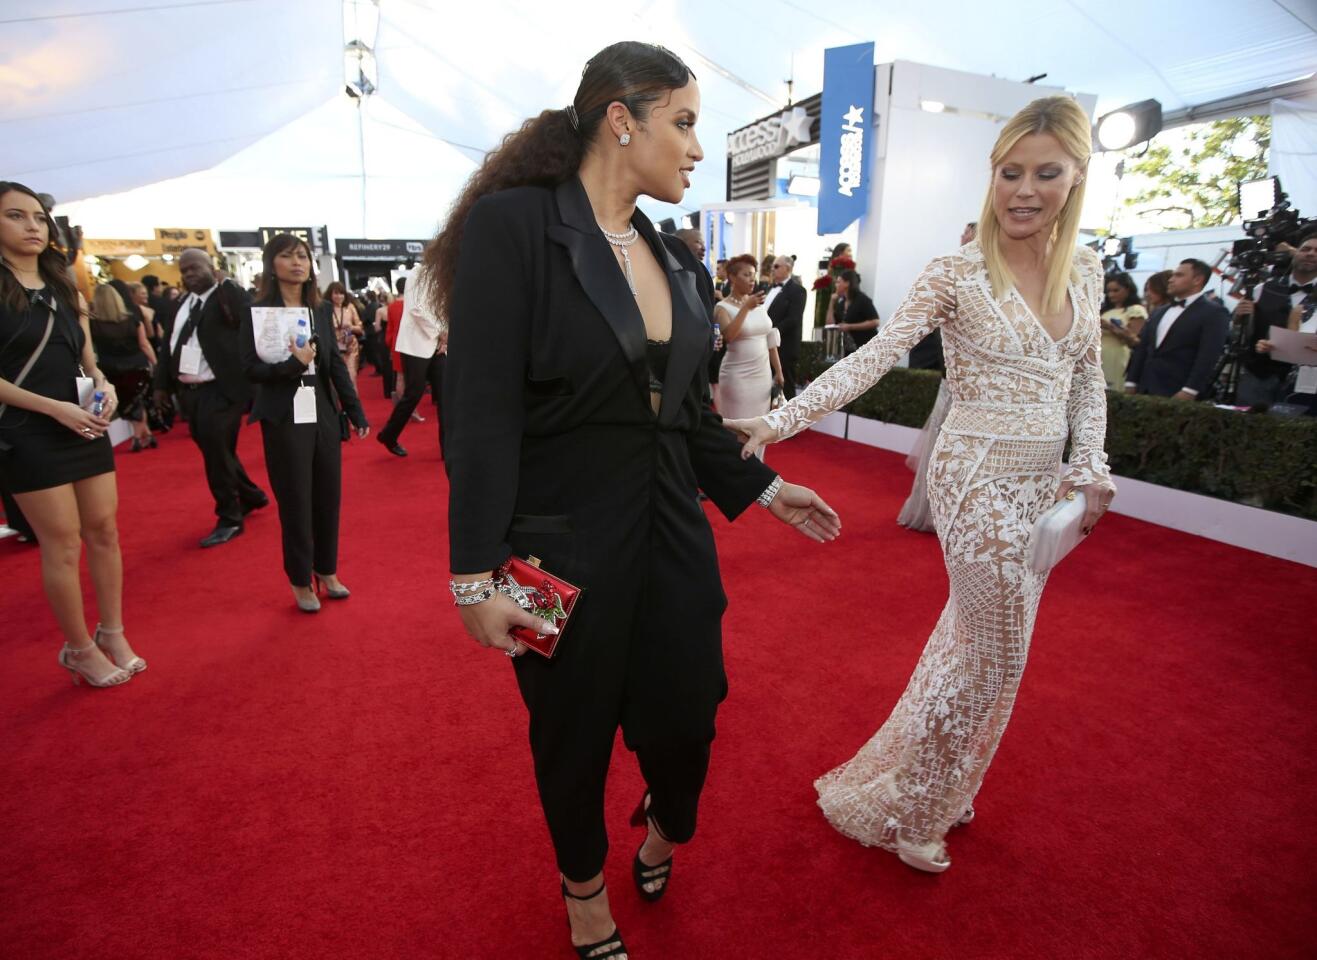 Actresses Polanco and Bowen greet each other on the red carpet as they arrive at the 23rd Screen Actors Guild Awards in Los Angeles